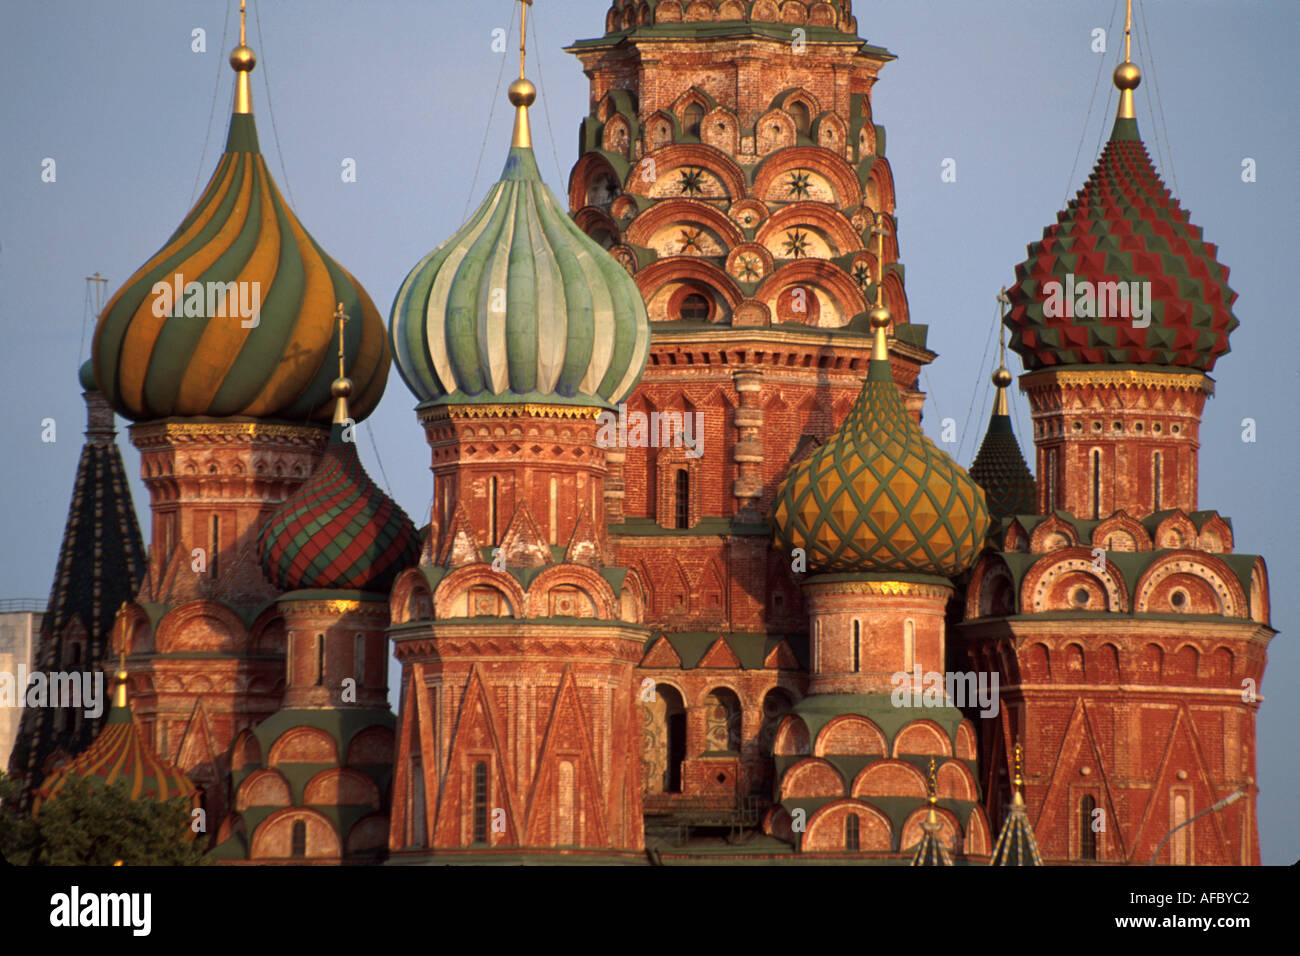 Moscow Russia,Eastern Europe European,Russian Federation,Red Square,St. Basil's Cathedral,built 1555 60 by Ivan the Terrible,Eastern Orthodox Church,r Stock Photo